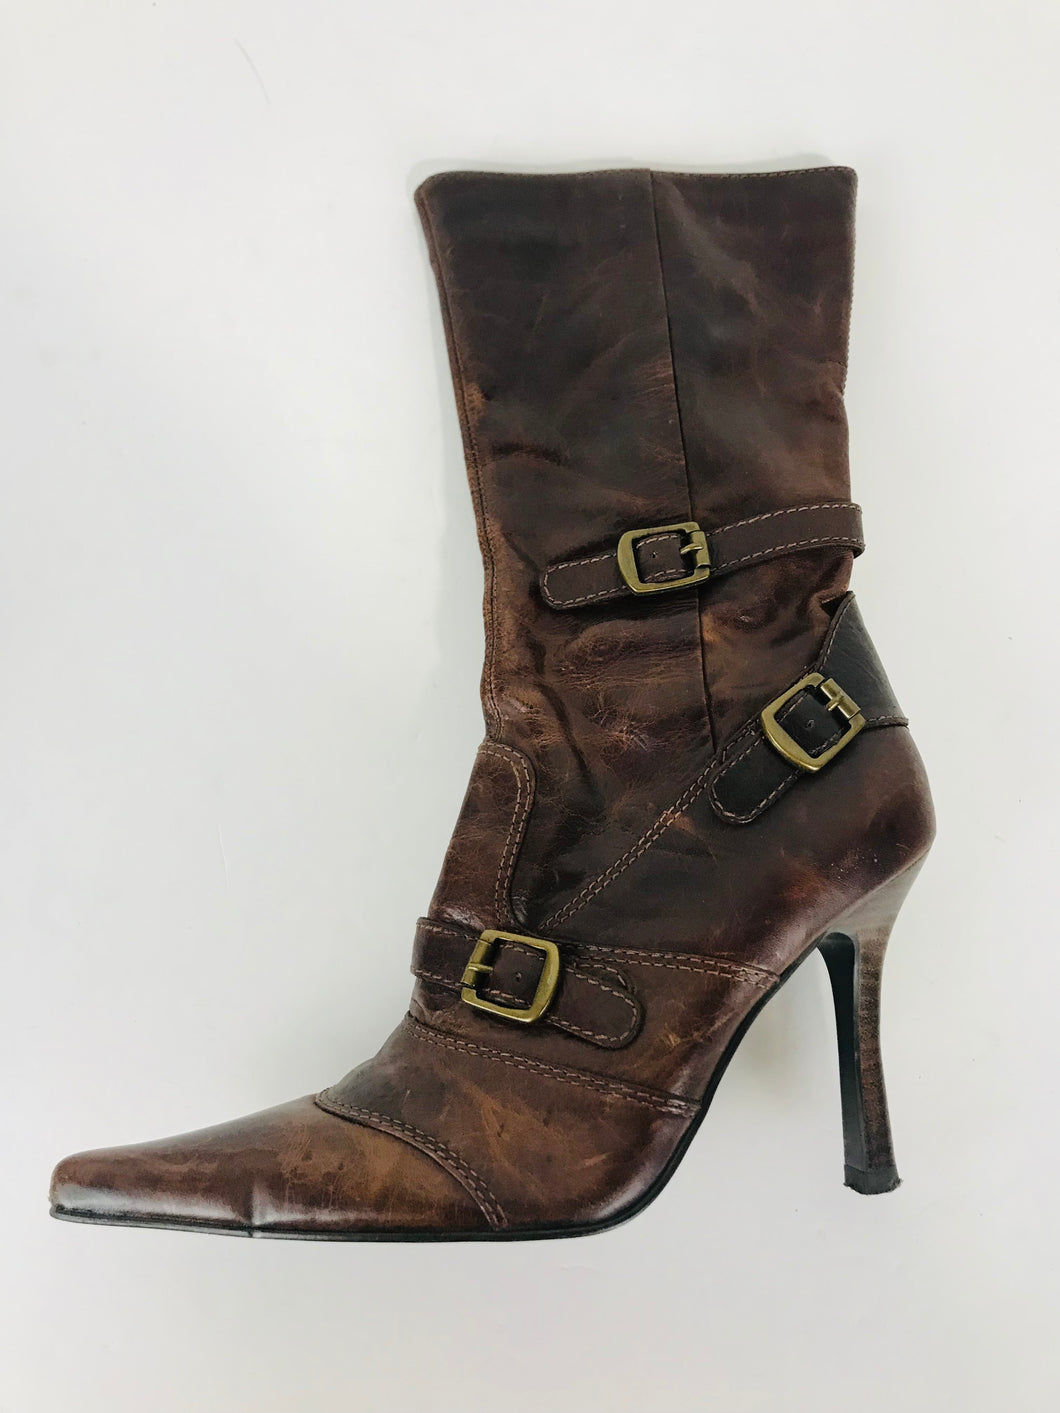 River Island Women's Leather Heeled Boots | UK4 | Brown